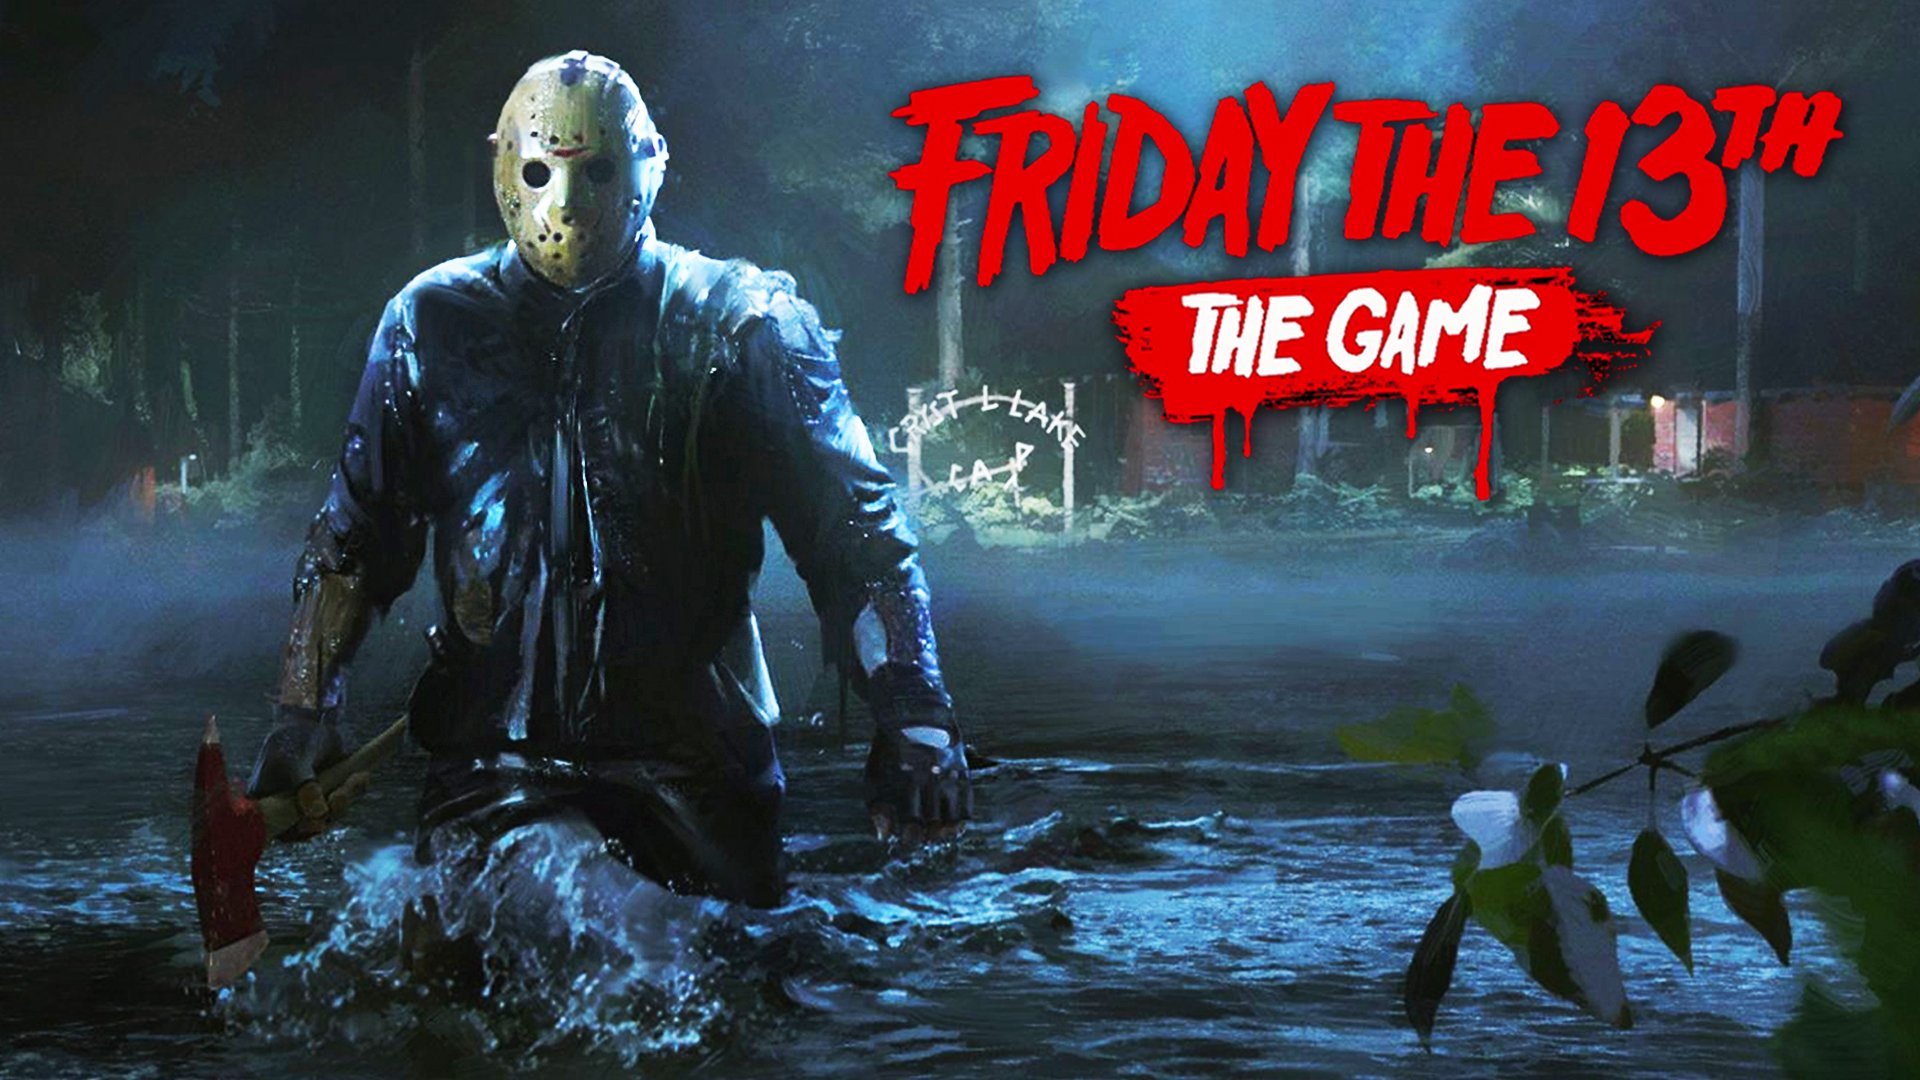 Friday the 13th: The Game para PC solo 3,3€